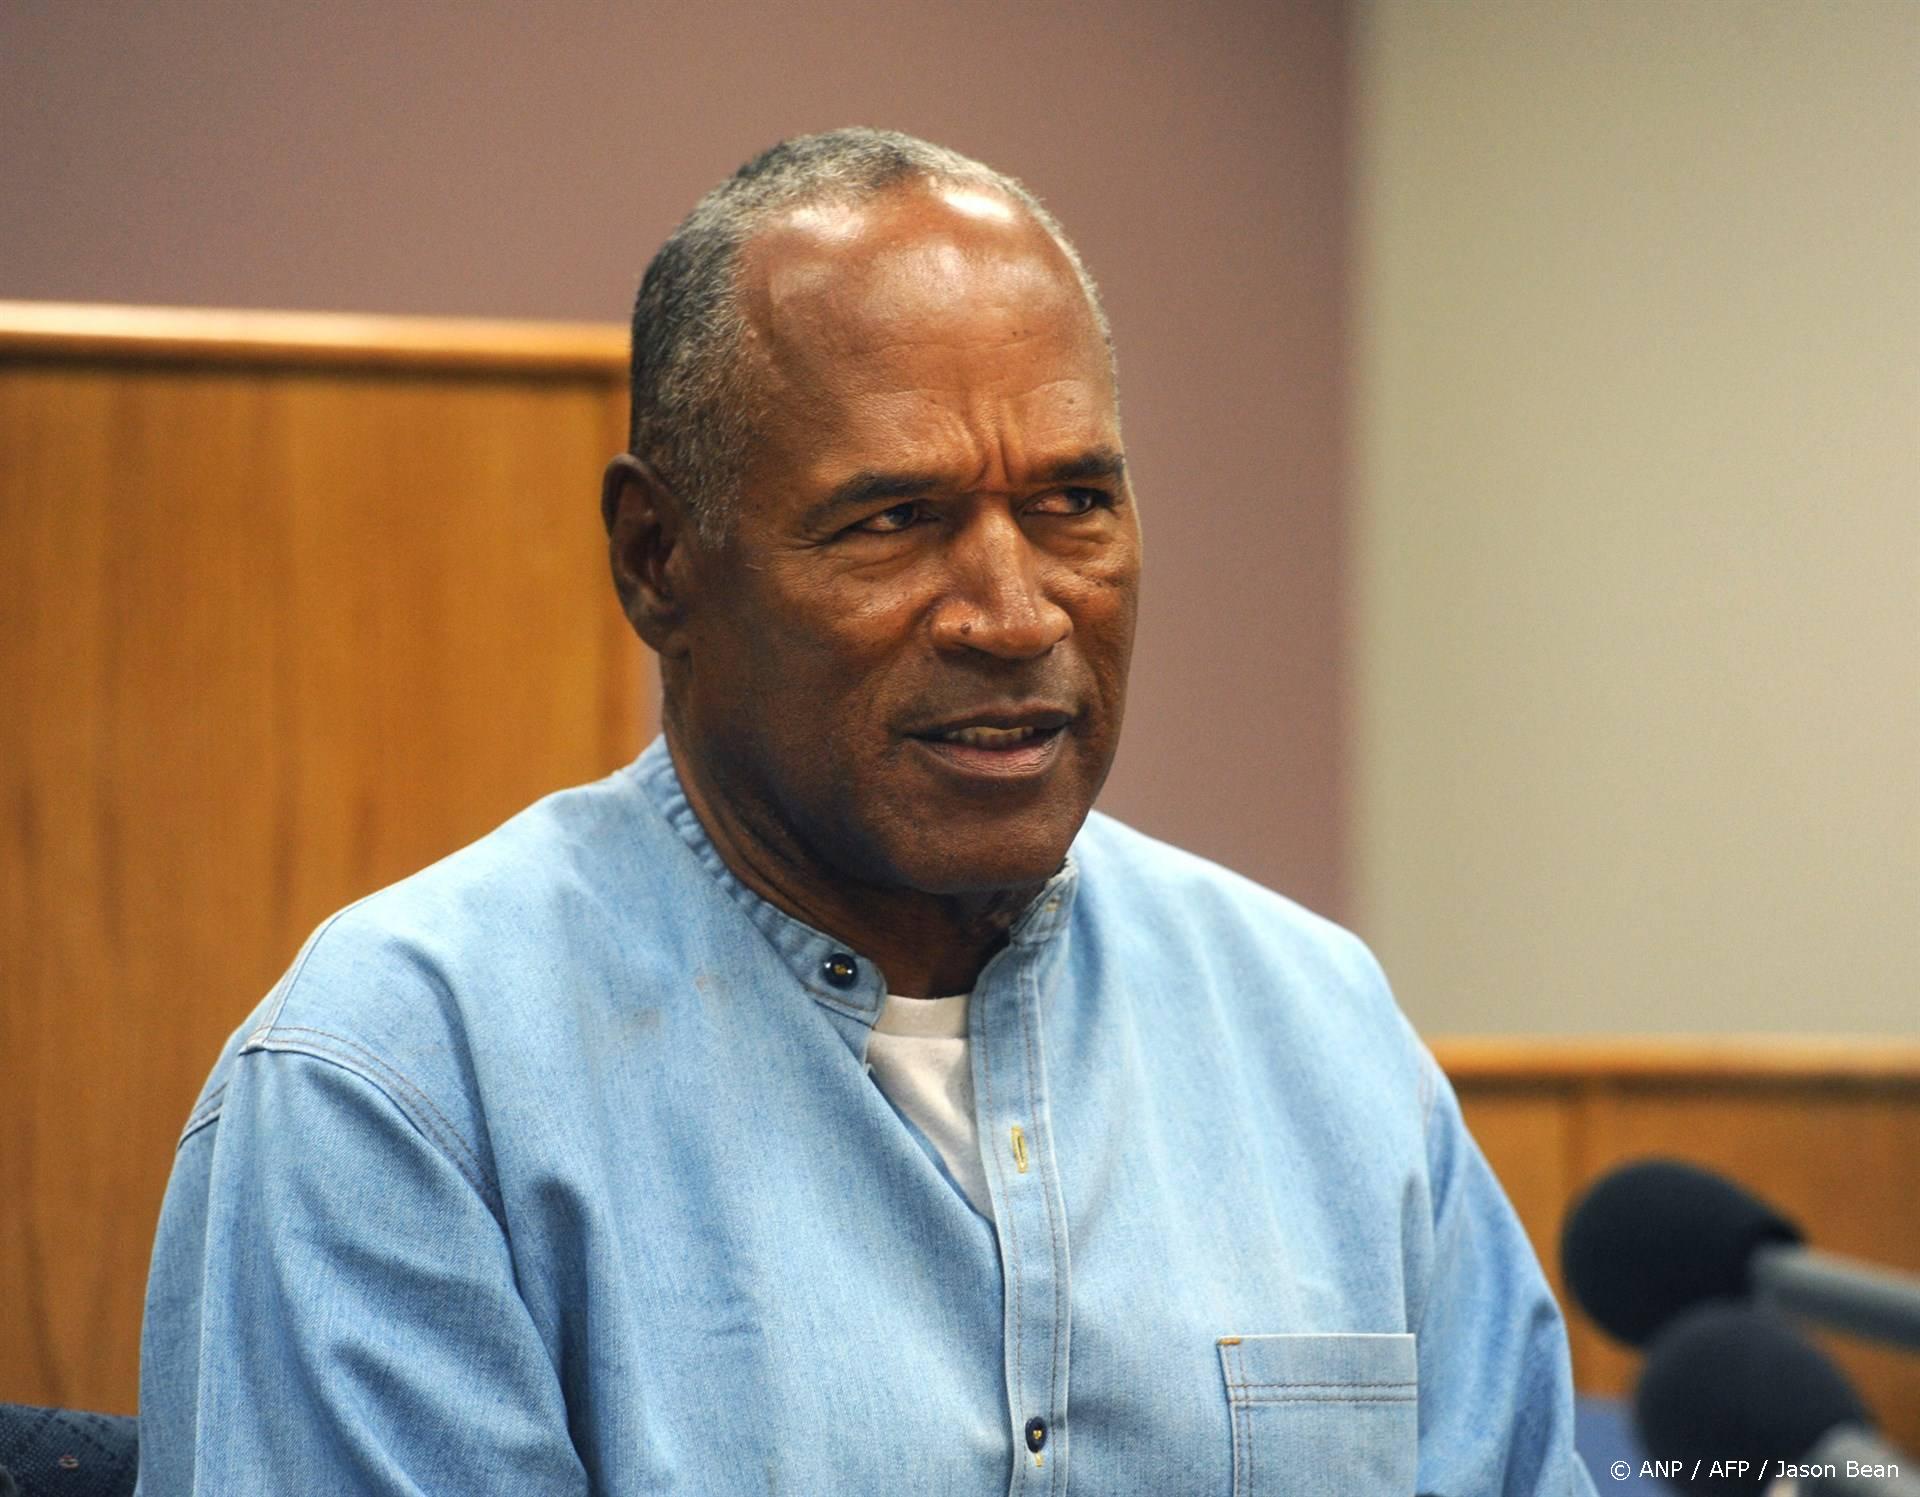 O.J. Simpson looks on during his parole hearing at the Lovelock Correctional Center in Lovelock, Nevada on July 20, 2017. Disgraced former American football star O.J. Simpson was granted his release from prison  after serving nearly nine years behind bars for armed robbery. A four-member parole board in the western US state of Nevada voted unanimously to free the 70-year-old Simpson after a public hearing broadcast live by US television networks.
Jason Bean / POOL / AFP